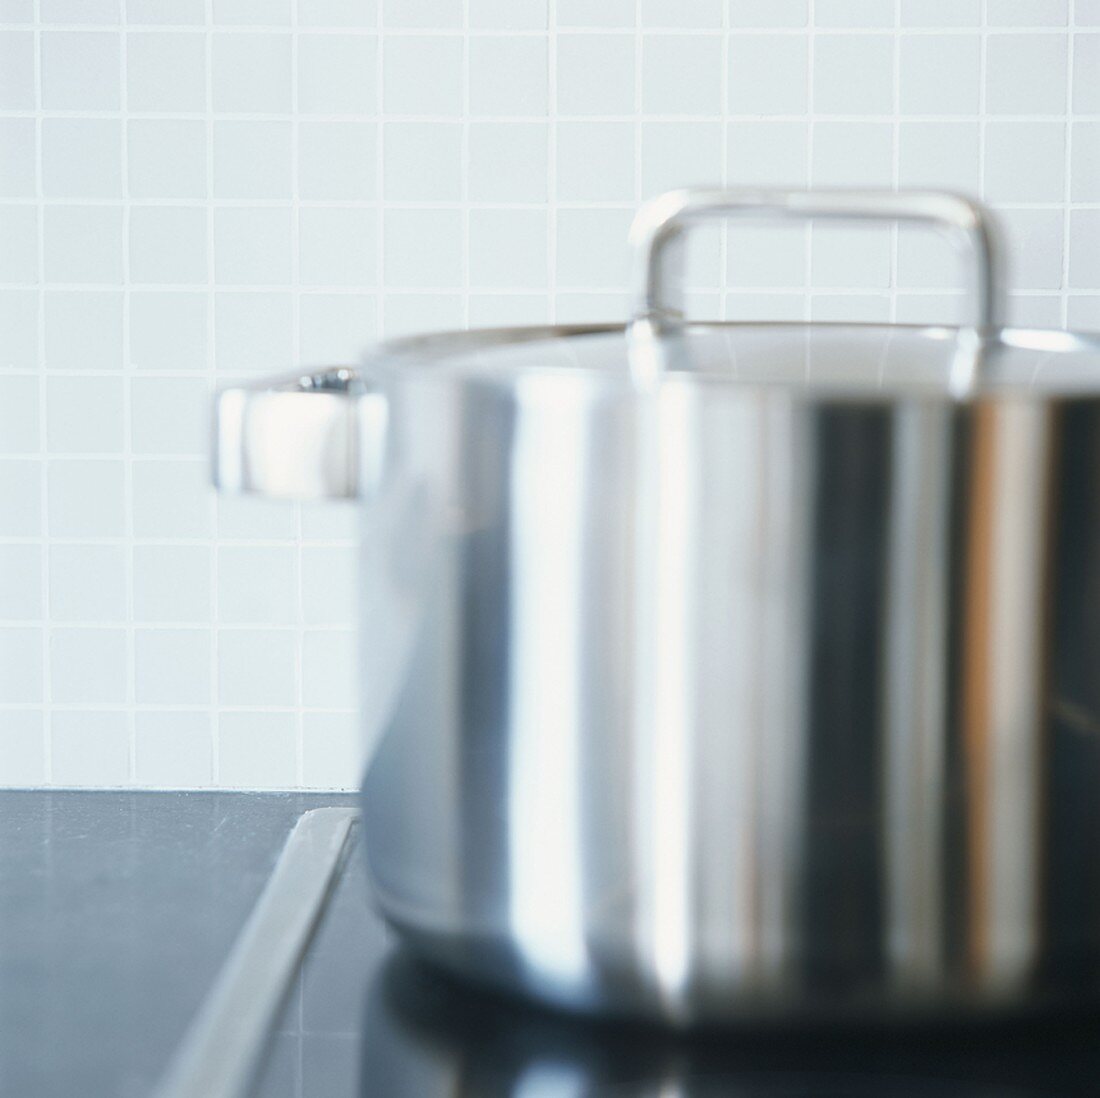 A stainless steel pan